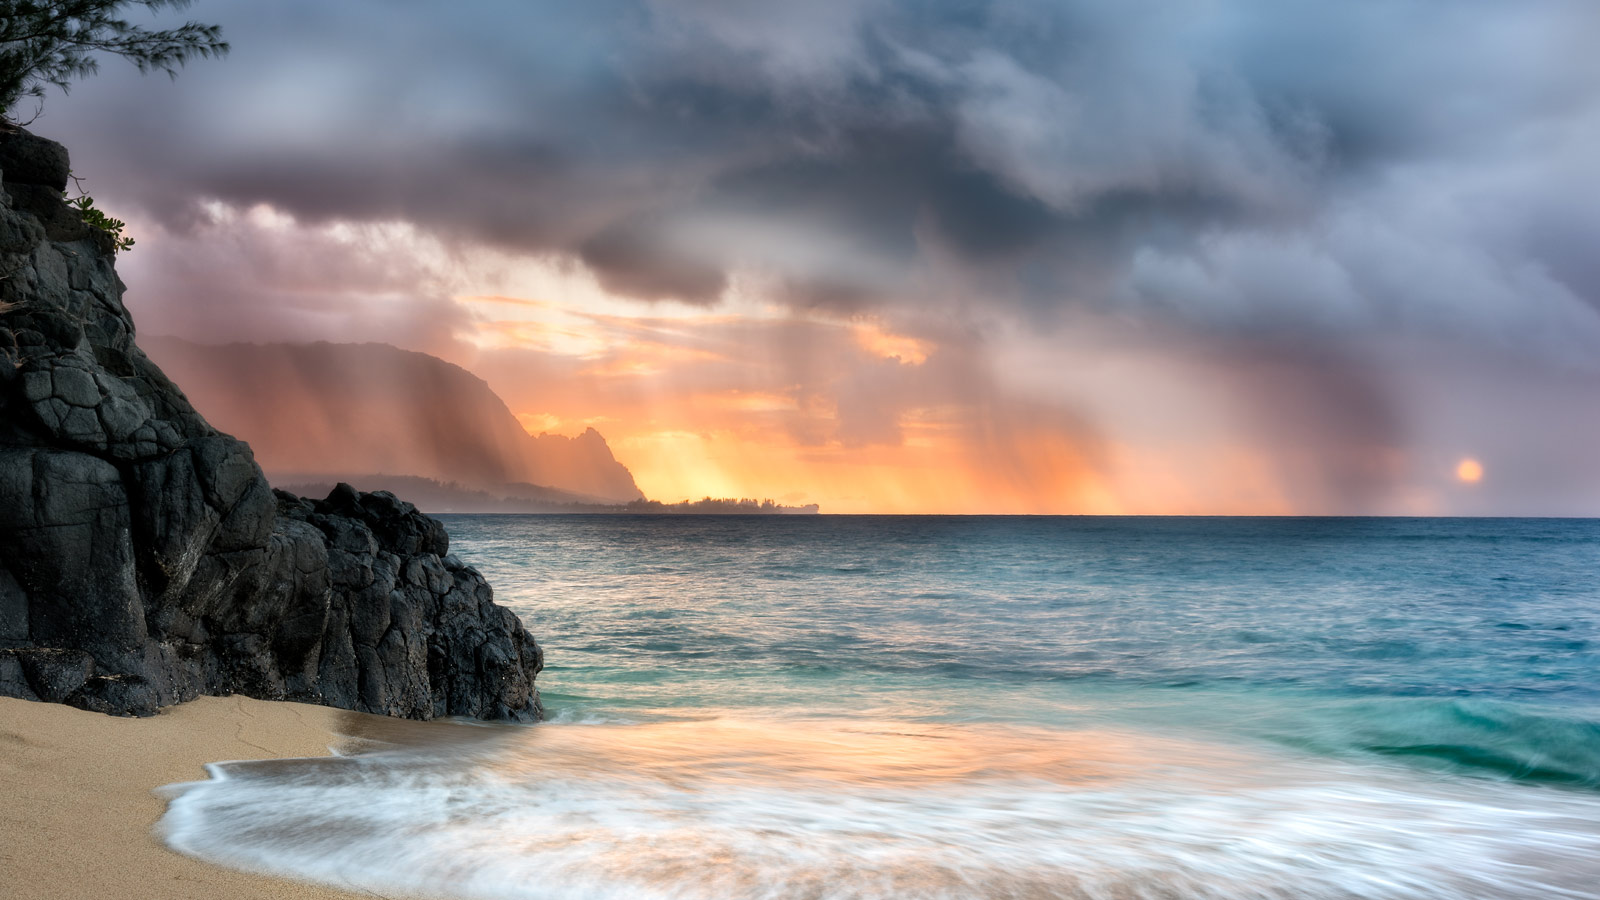 Beach in Hawaii with stormy sky